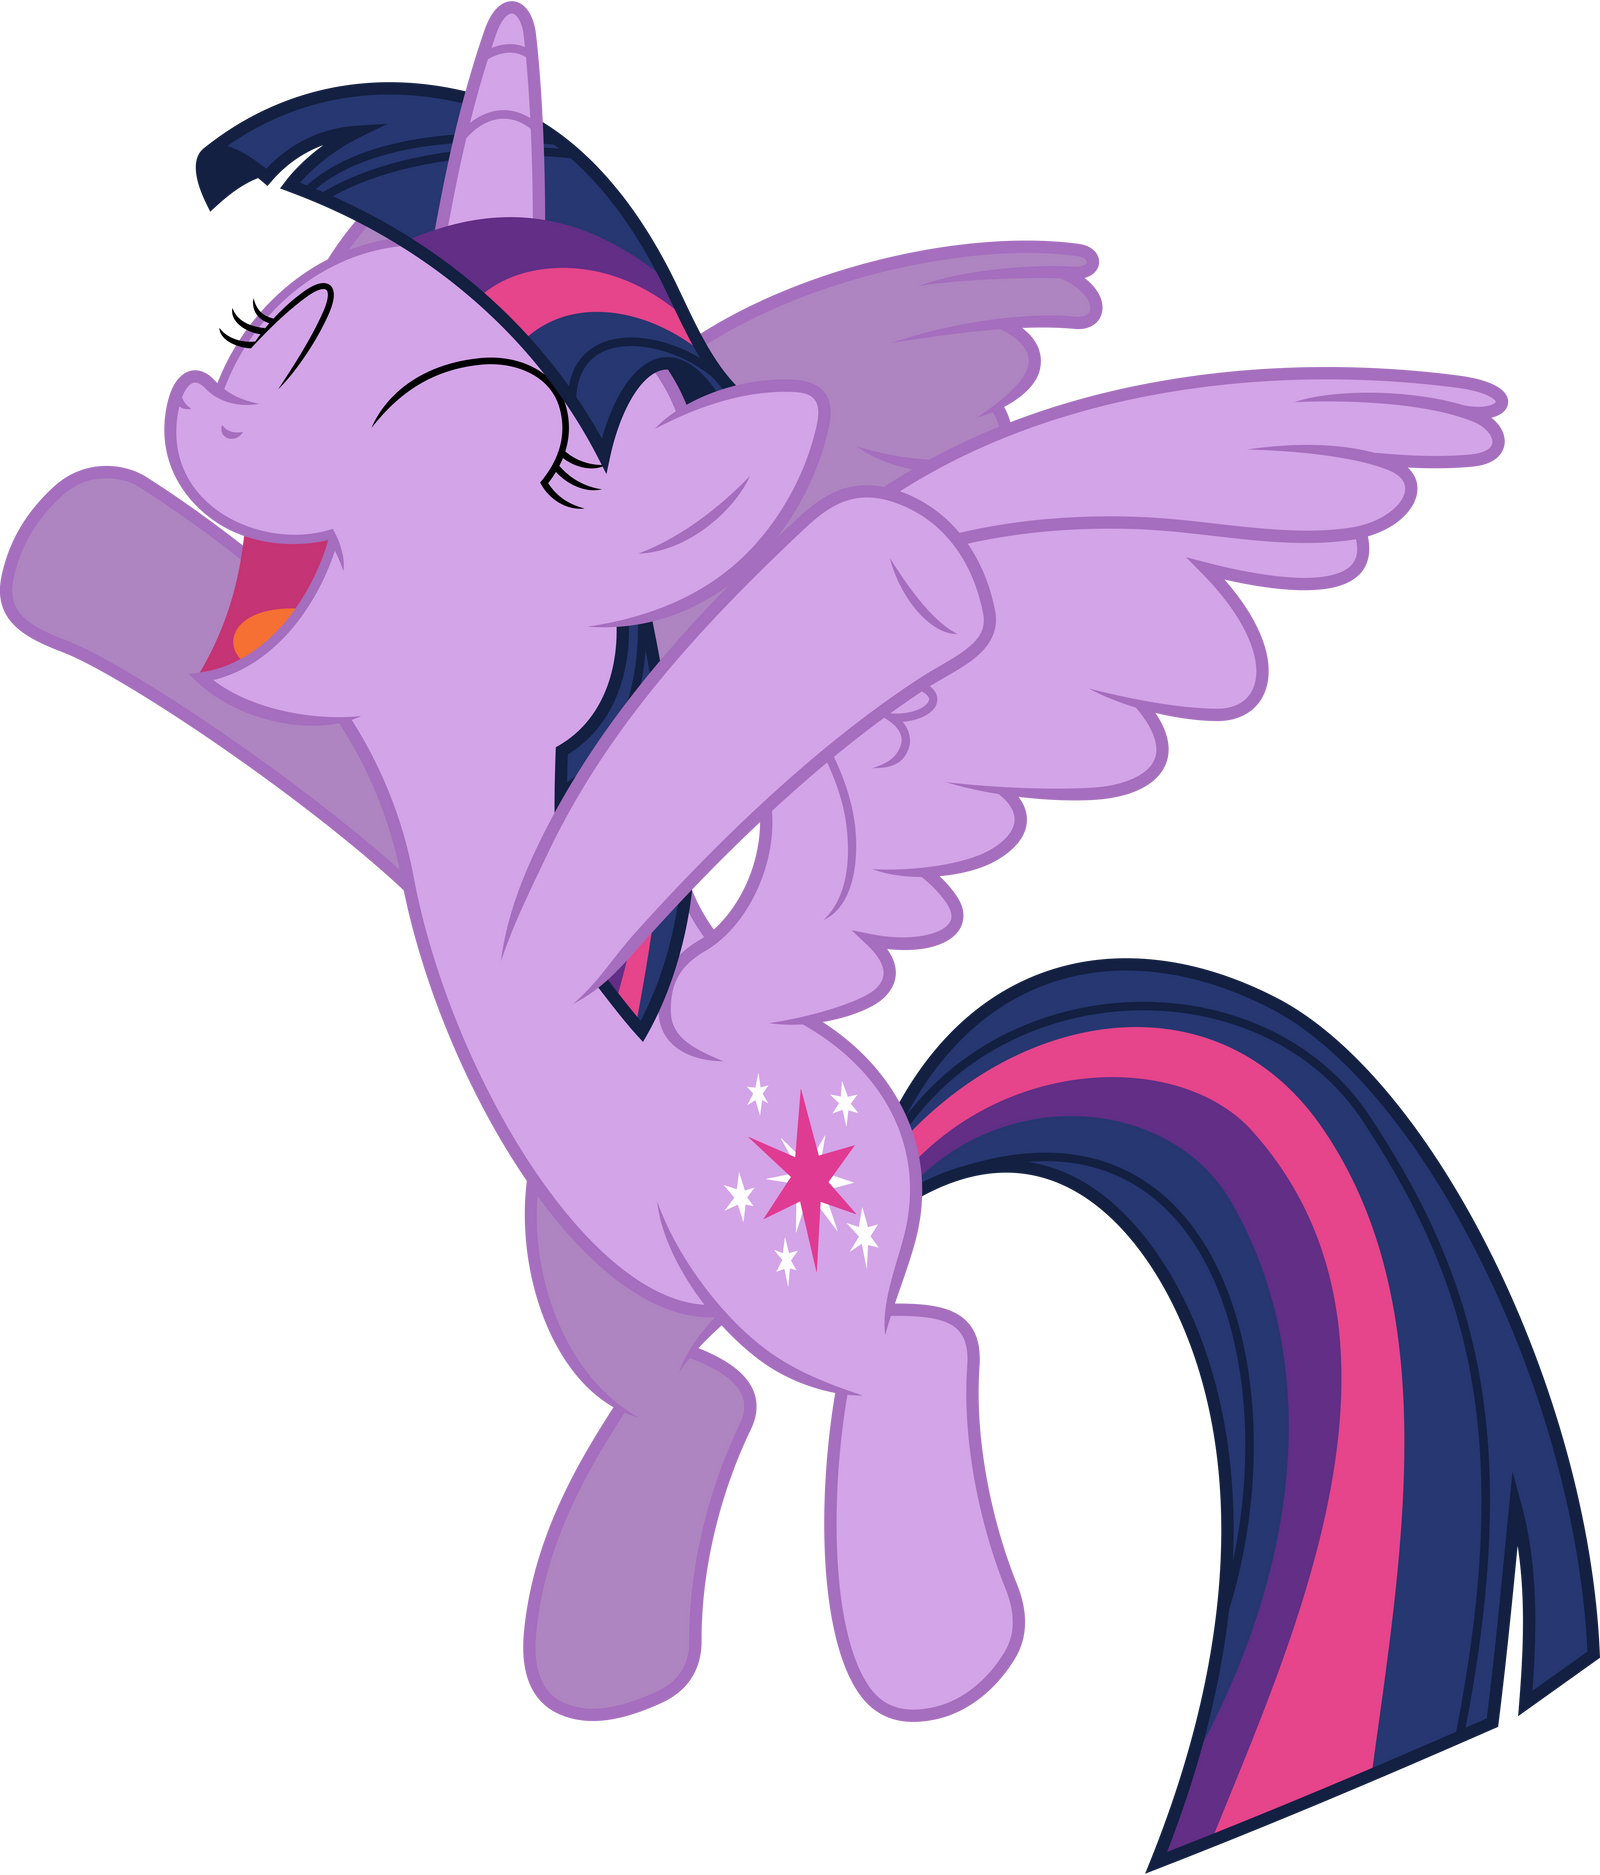 twilight_sparkle_cheering__2__by_90sigma-d7e1jey.png